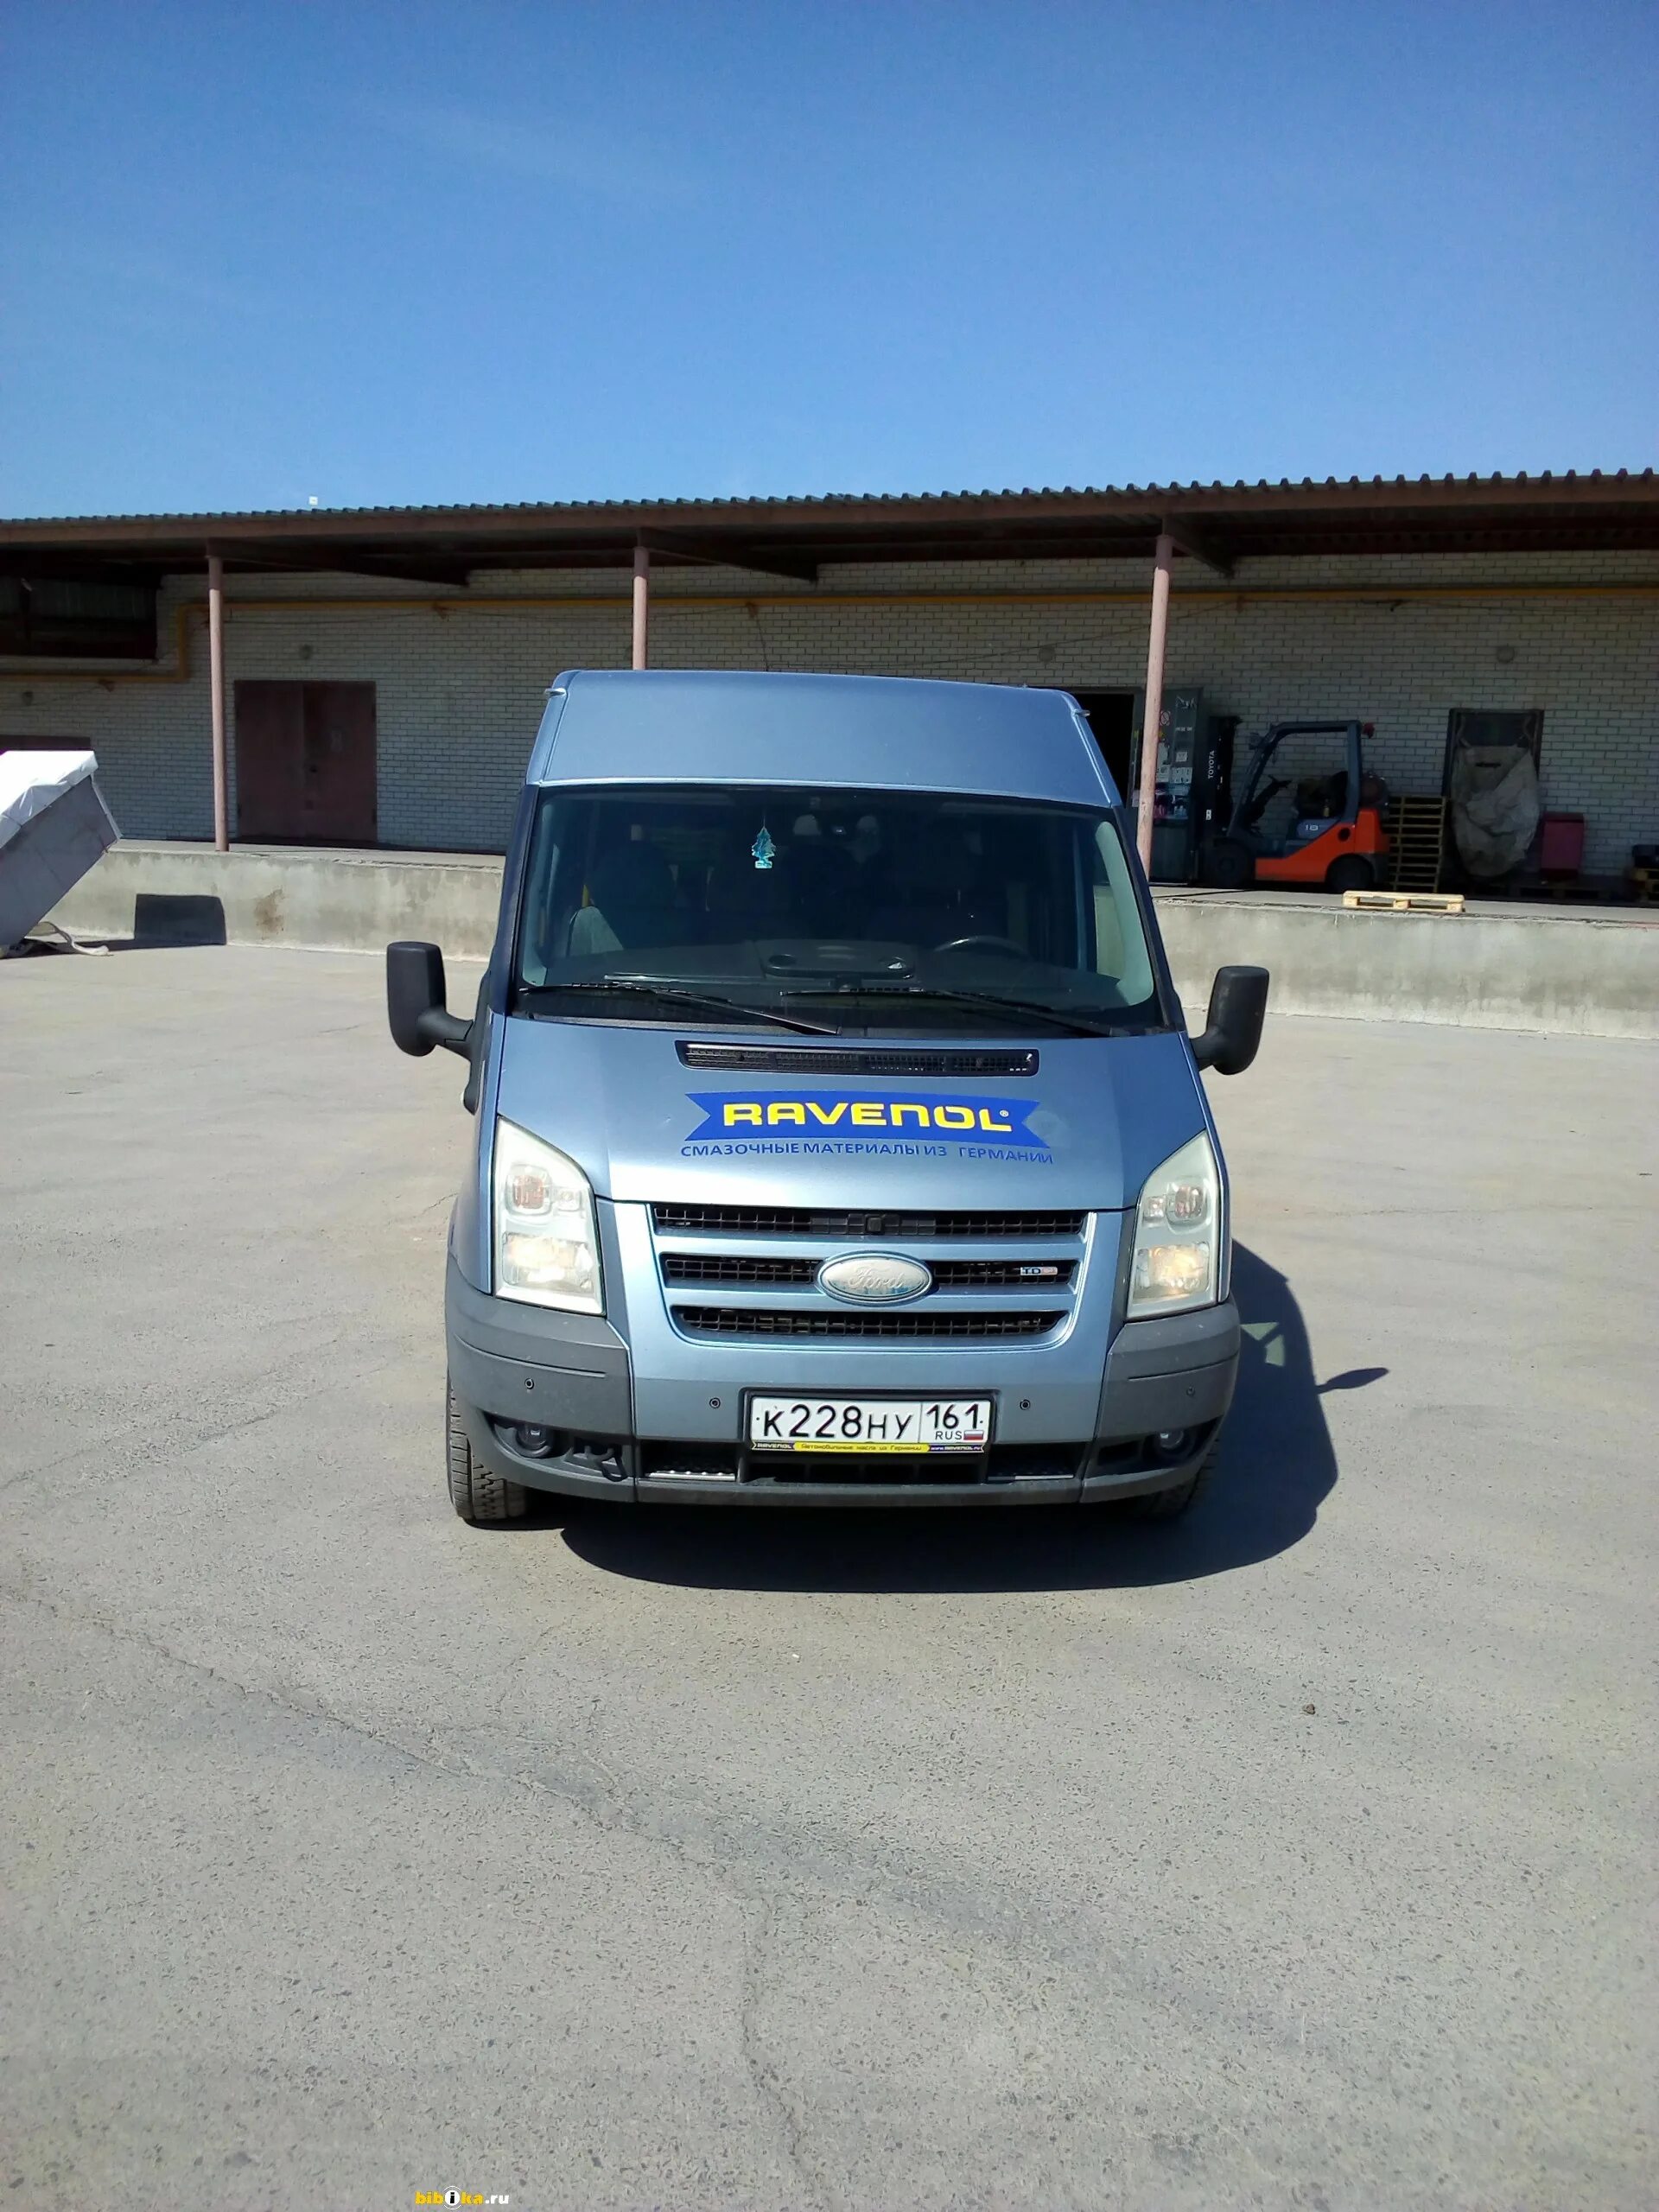 Ford Transit 2008. Форд Транзит 2008 года. Форд Транзит грузовой фургон 2008. Форд Транзит 2008 года 4 на 4.